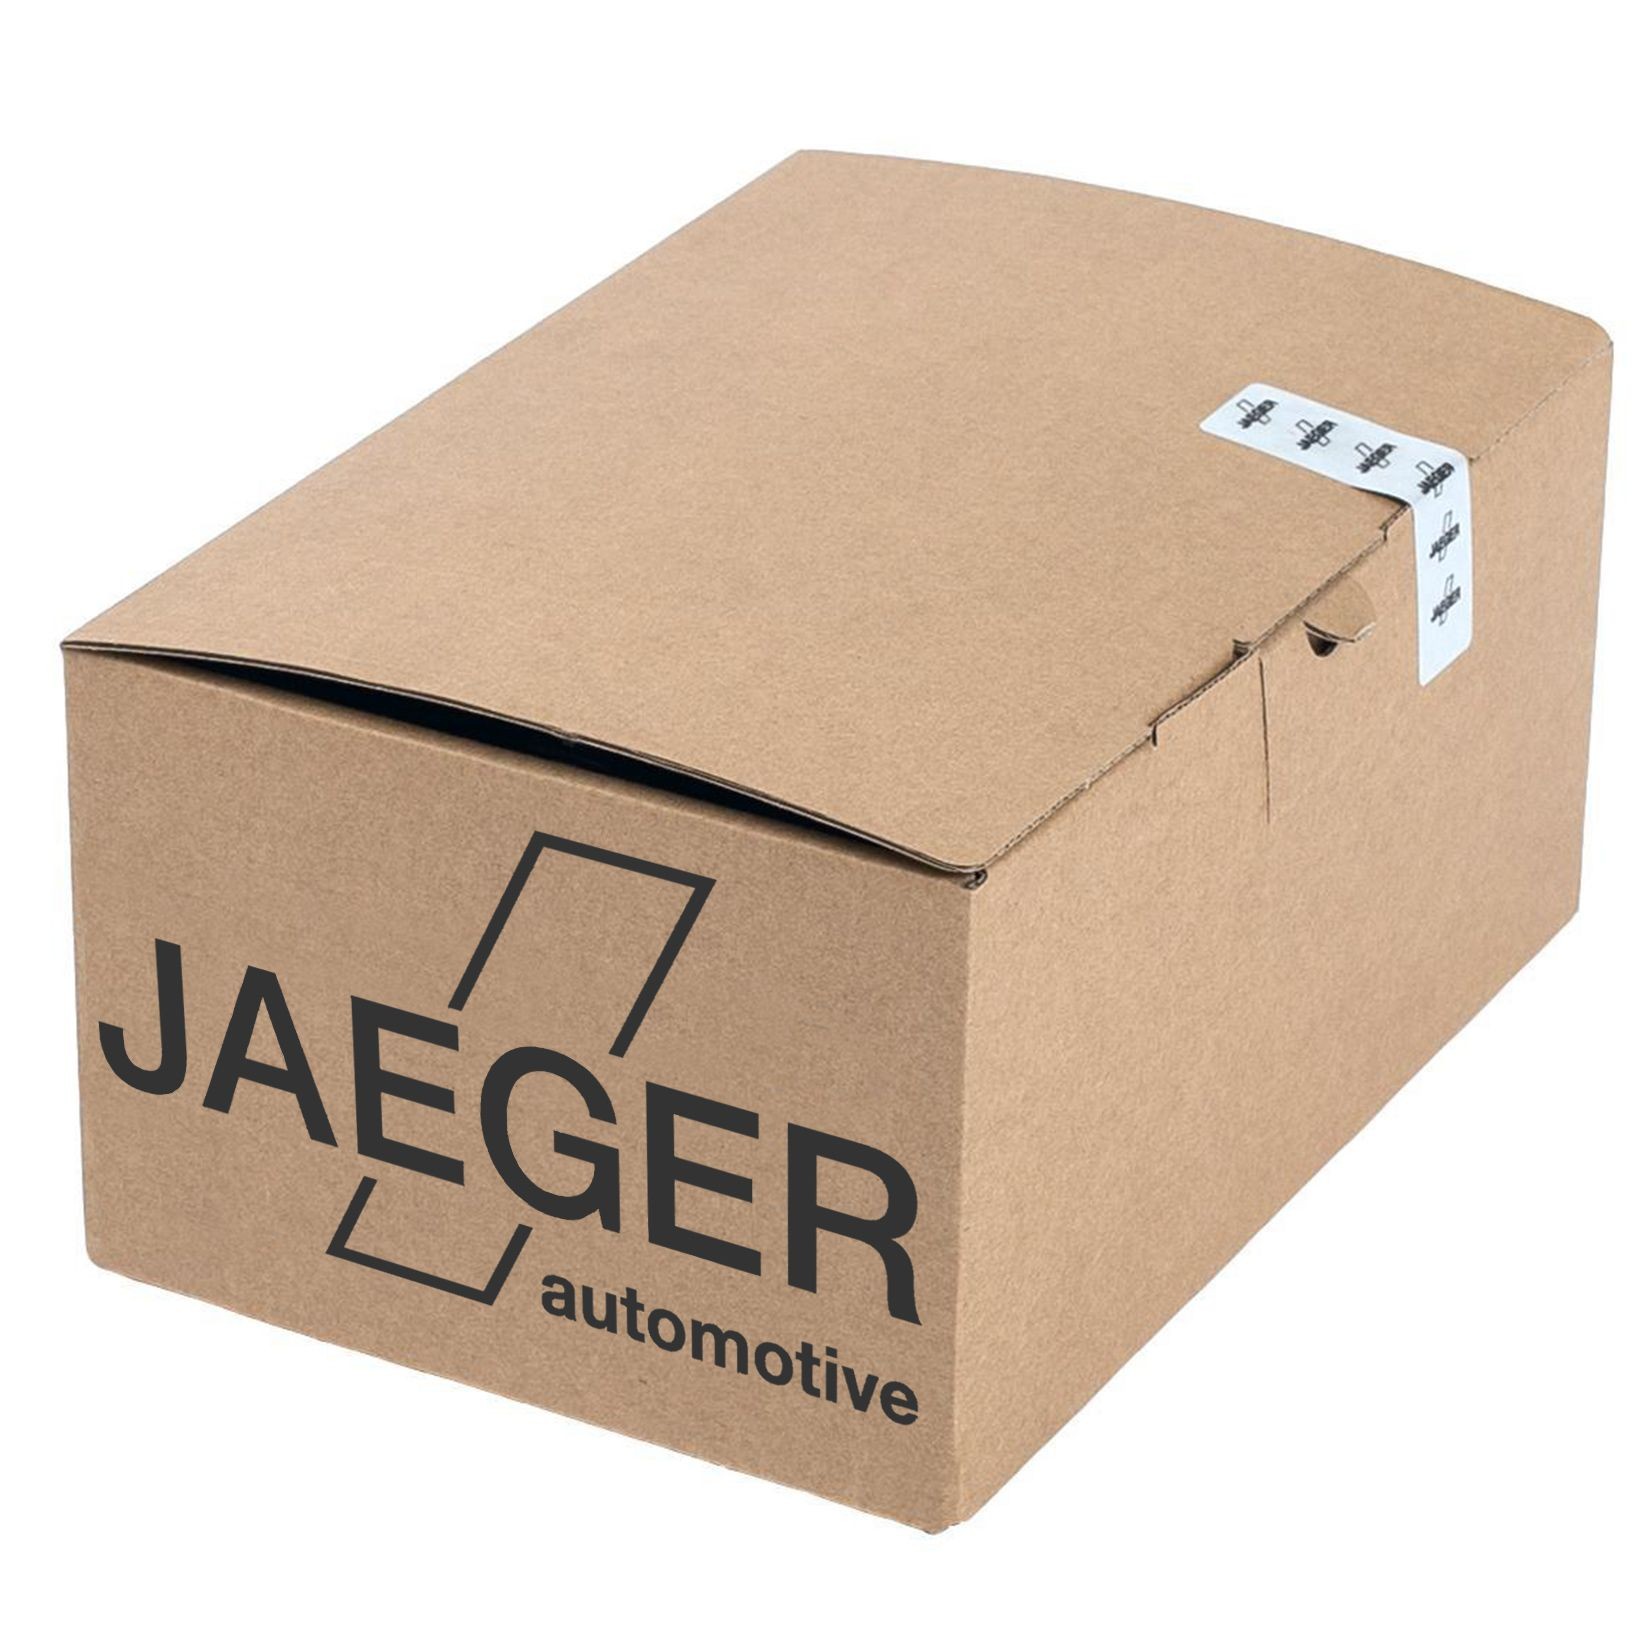 JAEGER 21020523 Electric kit, towbar 13-pin connector, Activation not required, PREMIUM E-kit